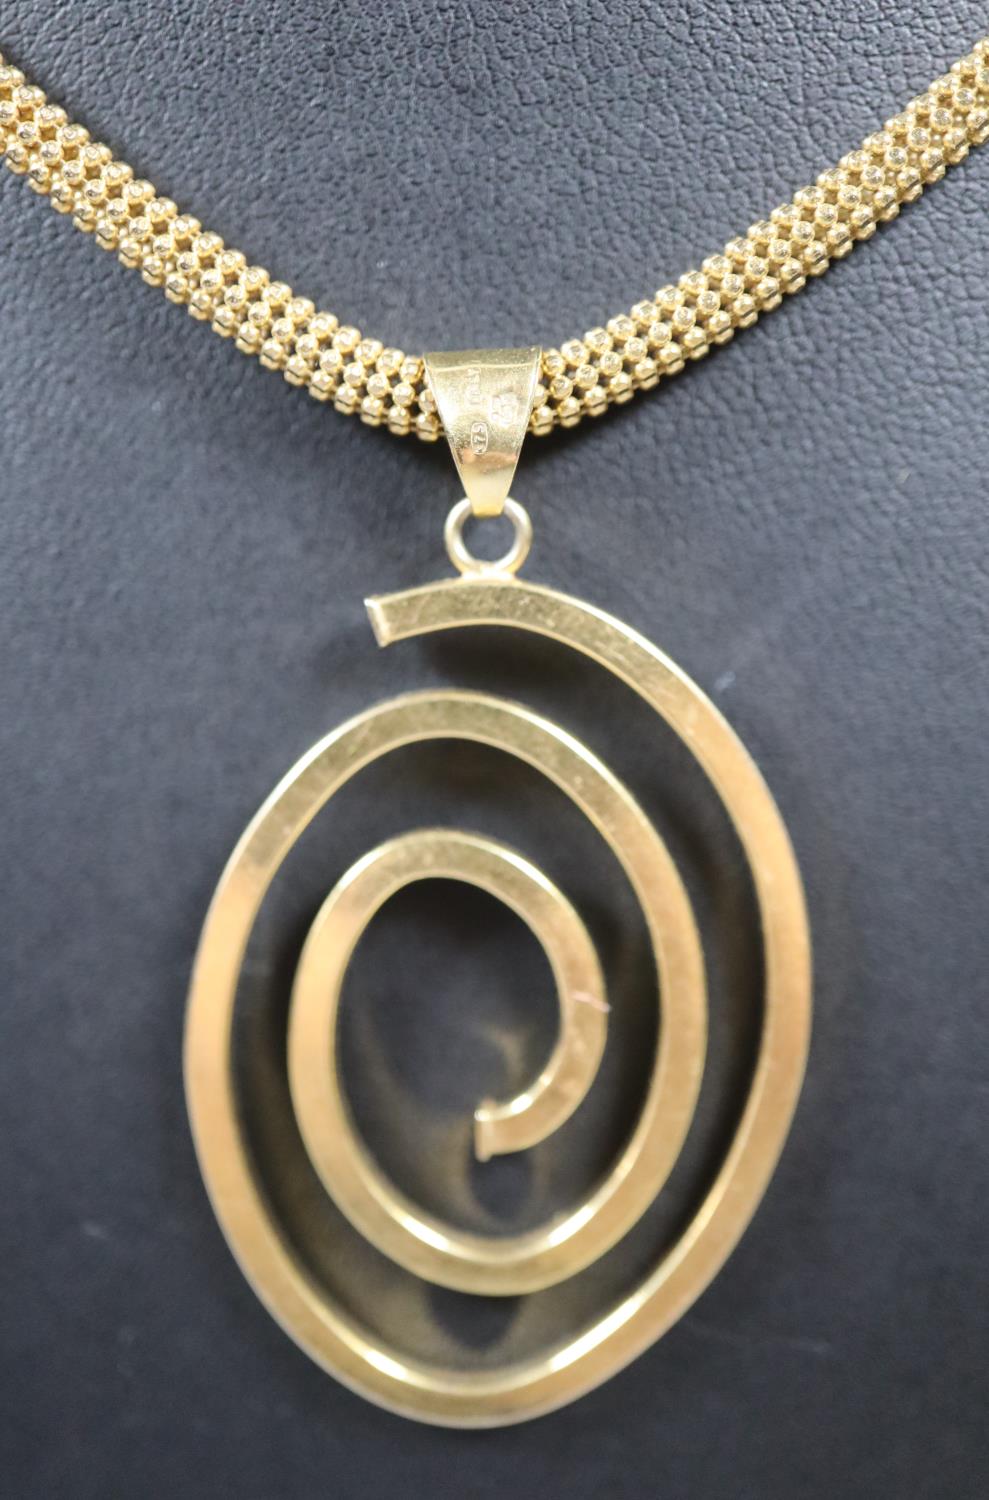 9ct gold articulated snake type necklace with scroll pendant. 15g approx. (B.P. 21% + VAT) - Image 2 of 3